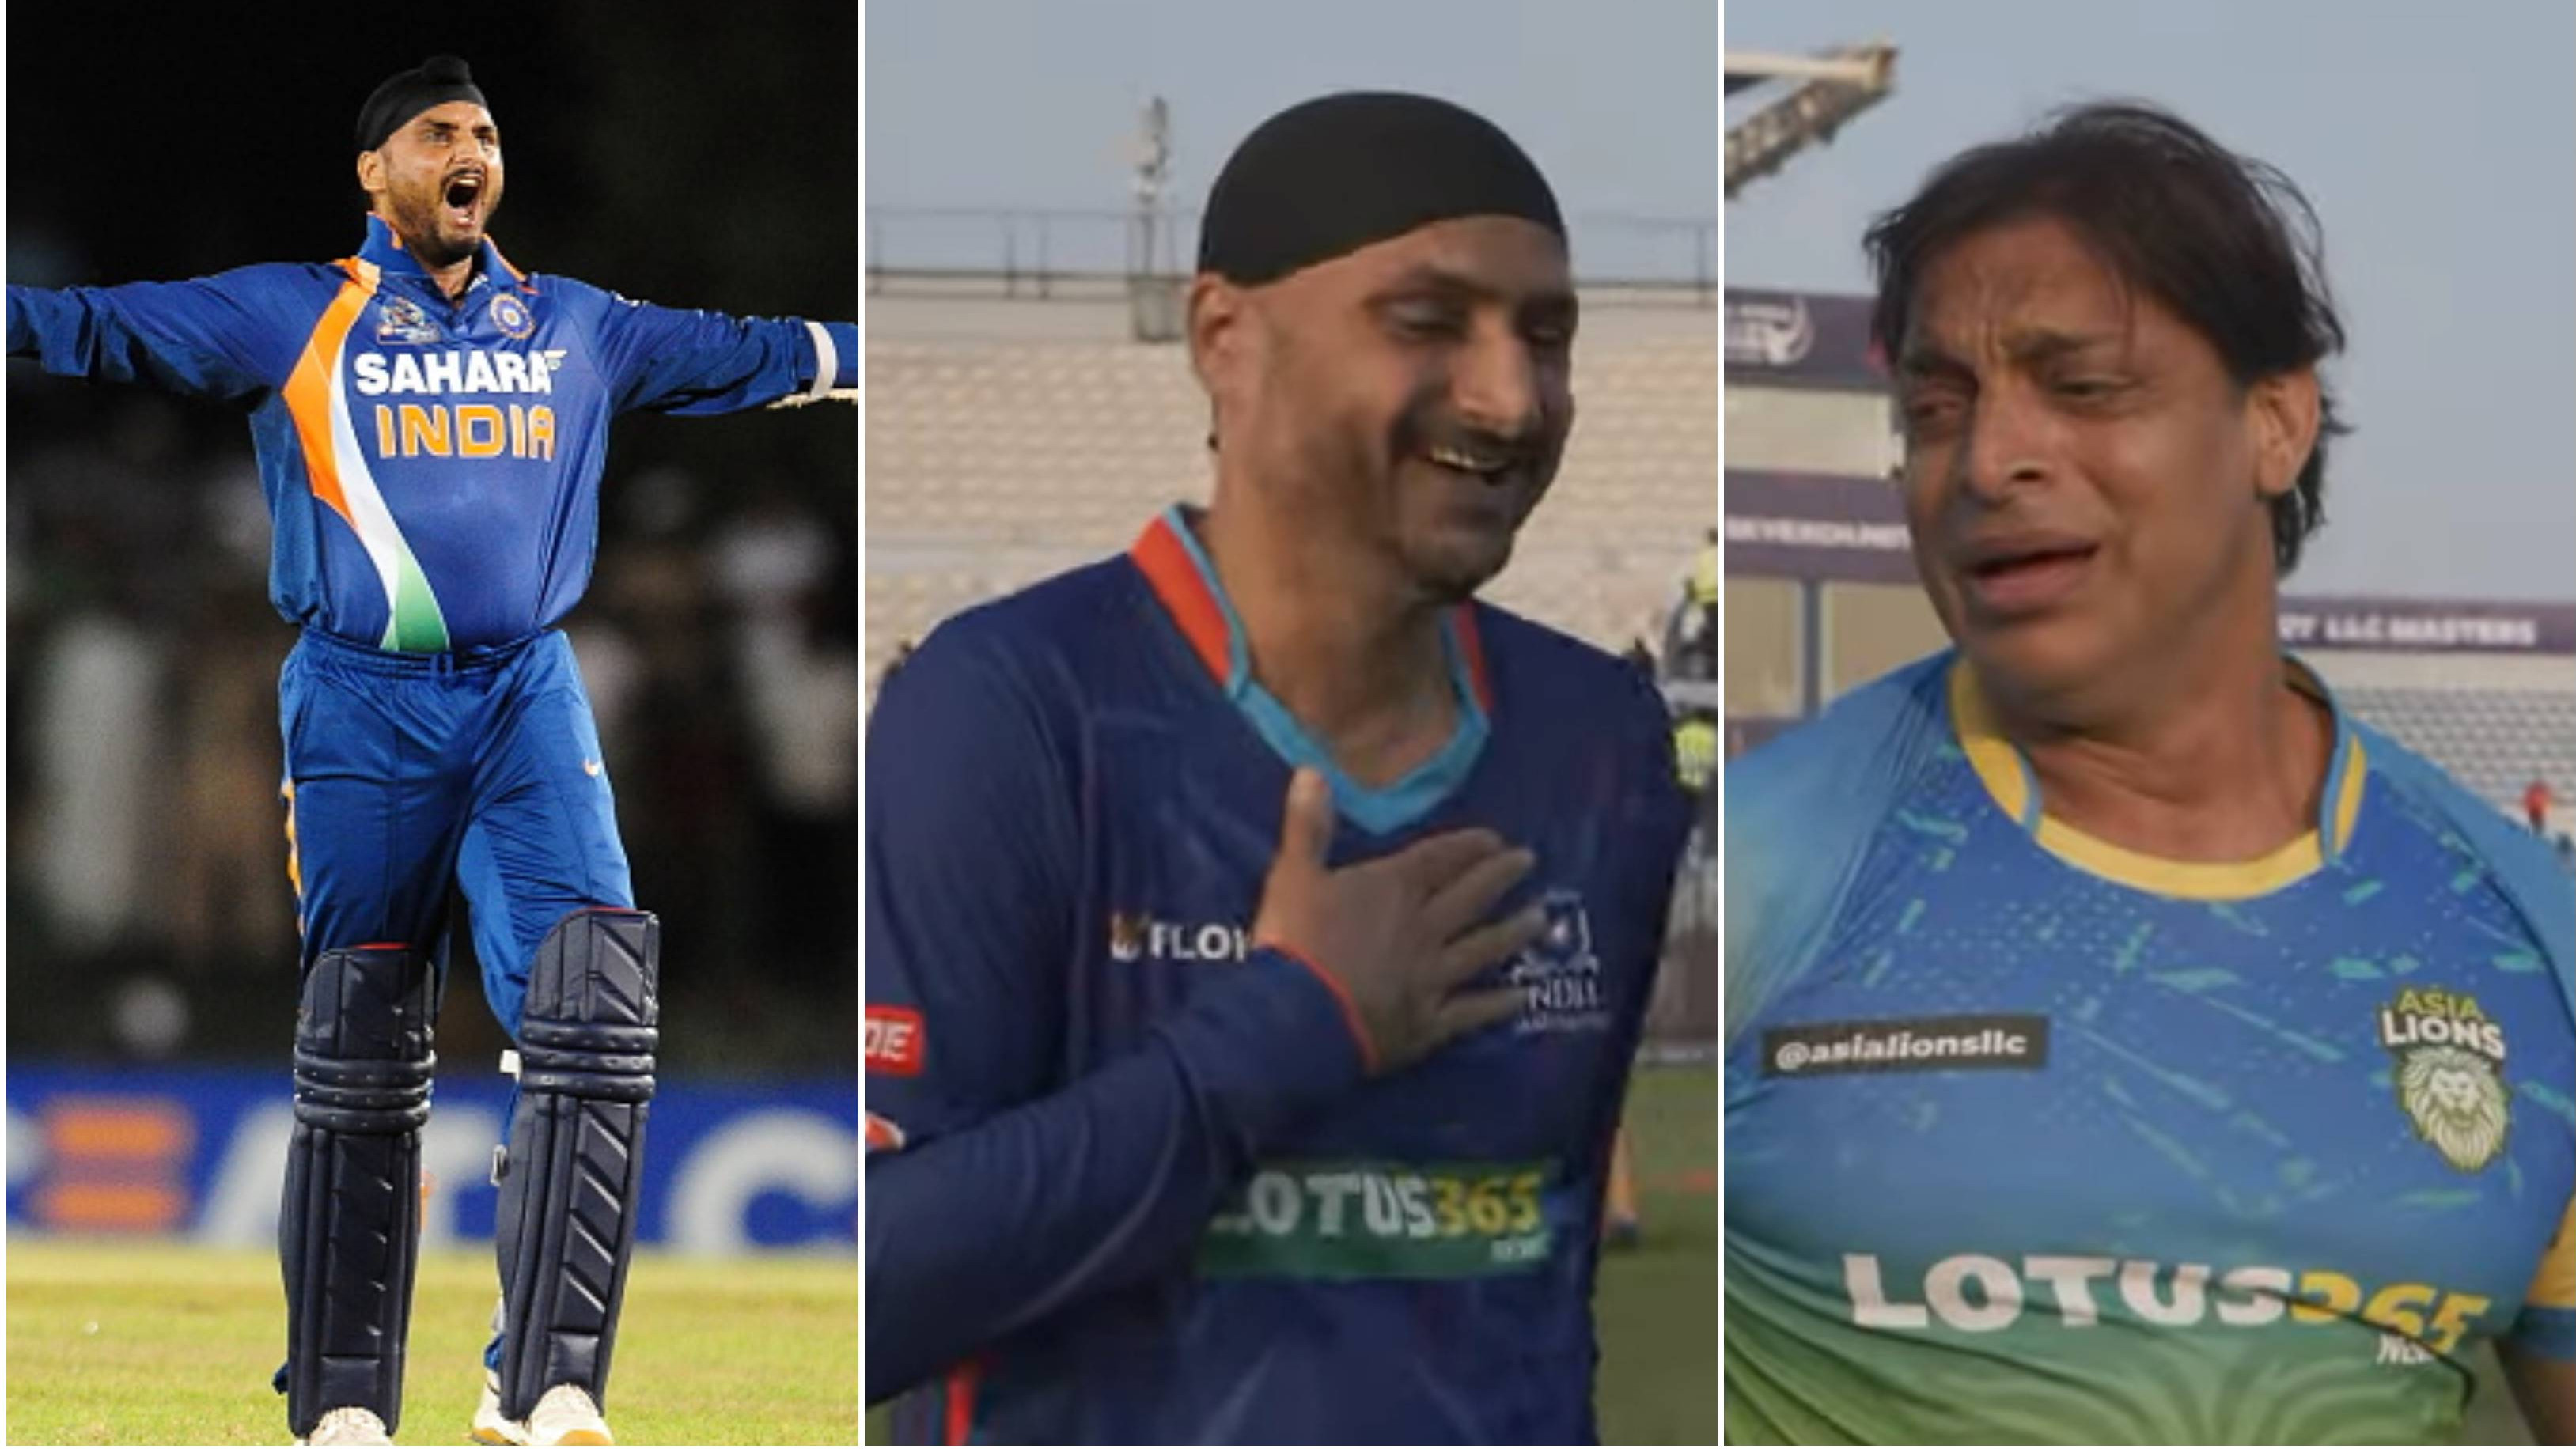 WATCH: “Should I tell everyone what you said?” Harbhajan reminds Akhtar of his six during 2010 Asia Cup match